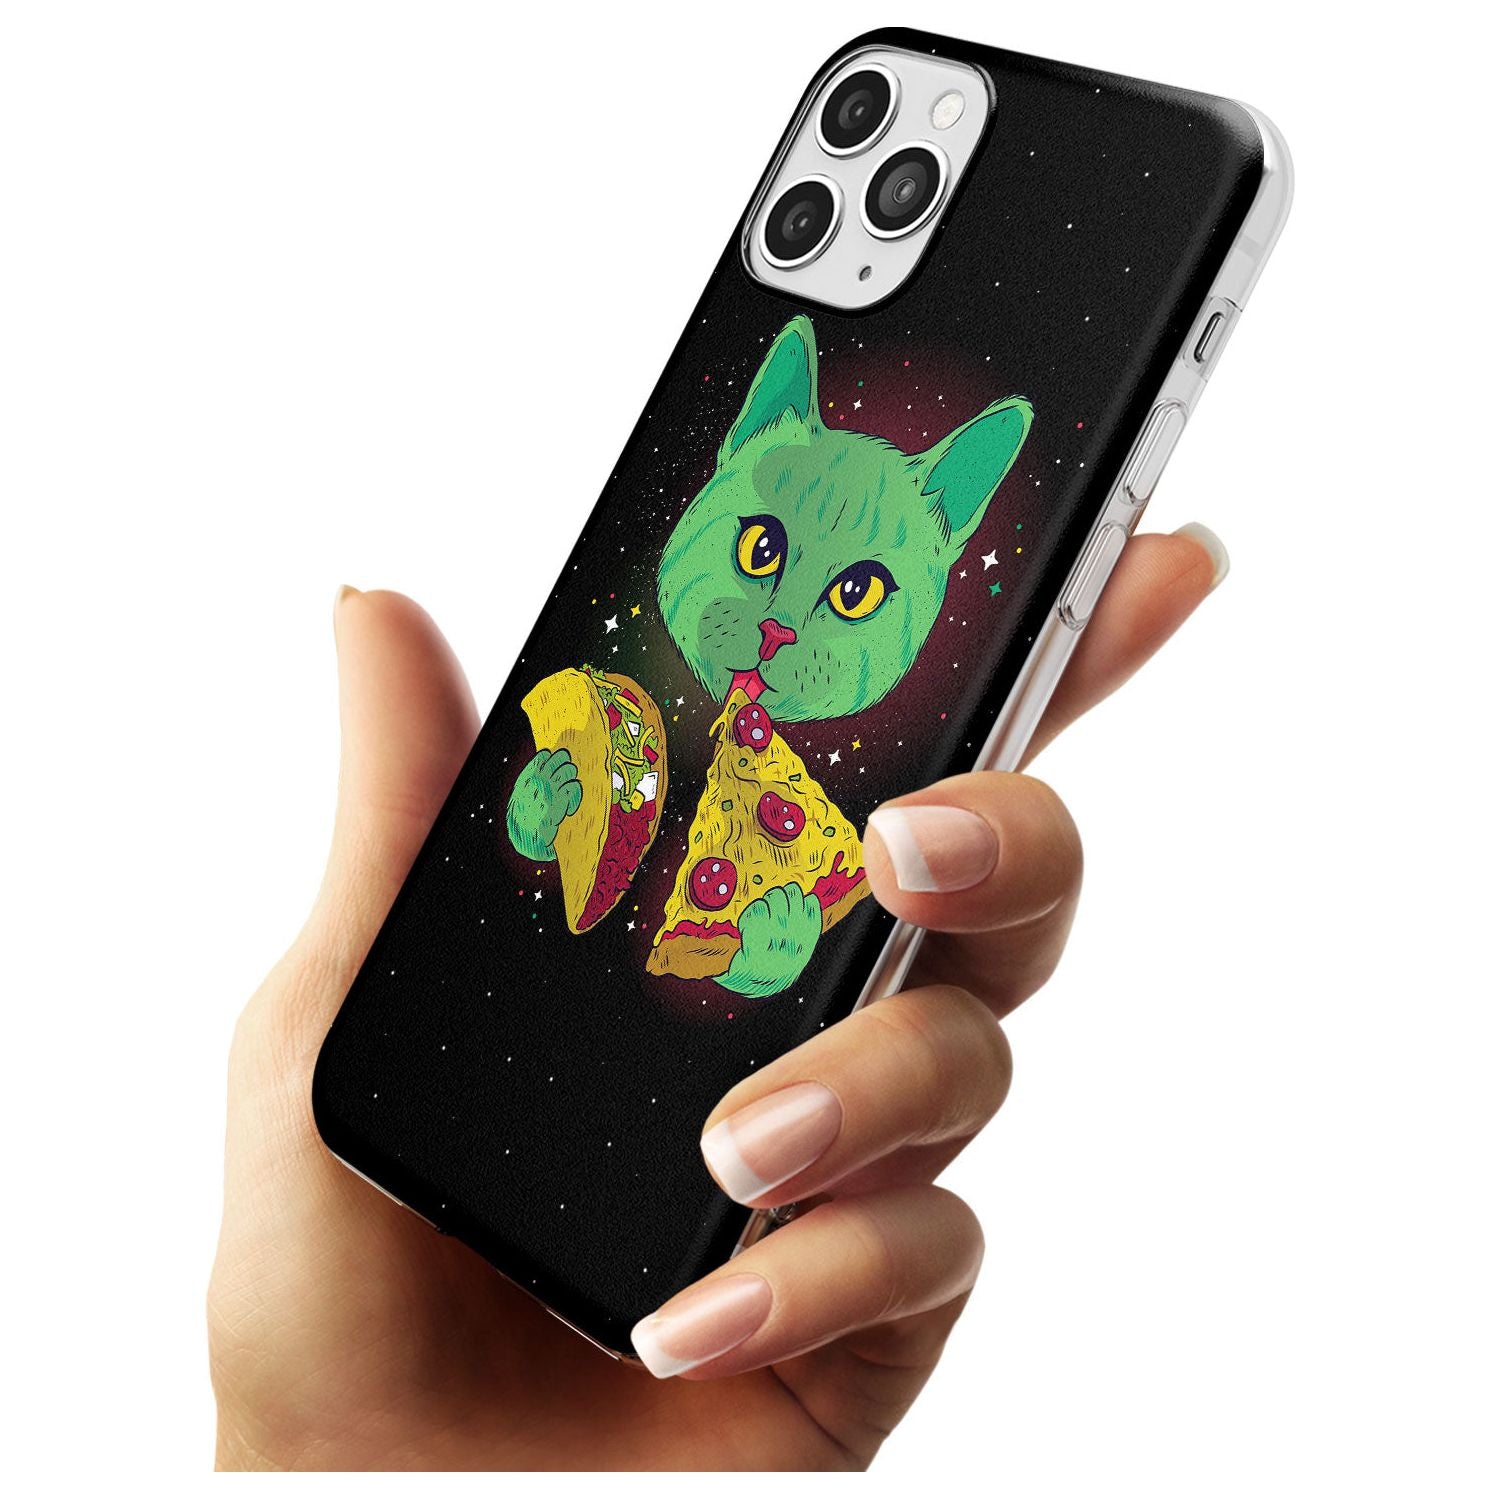 Pizza Purr Slim TPU Phone Case for iPhone 11 Pro Max